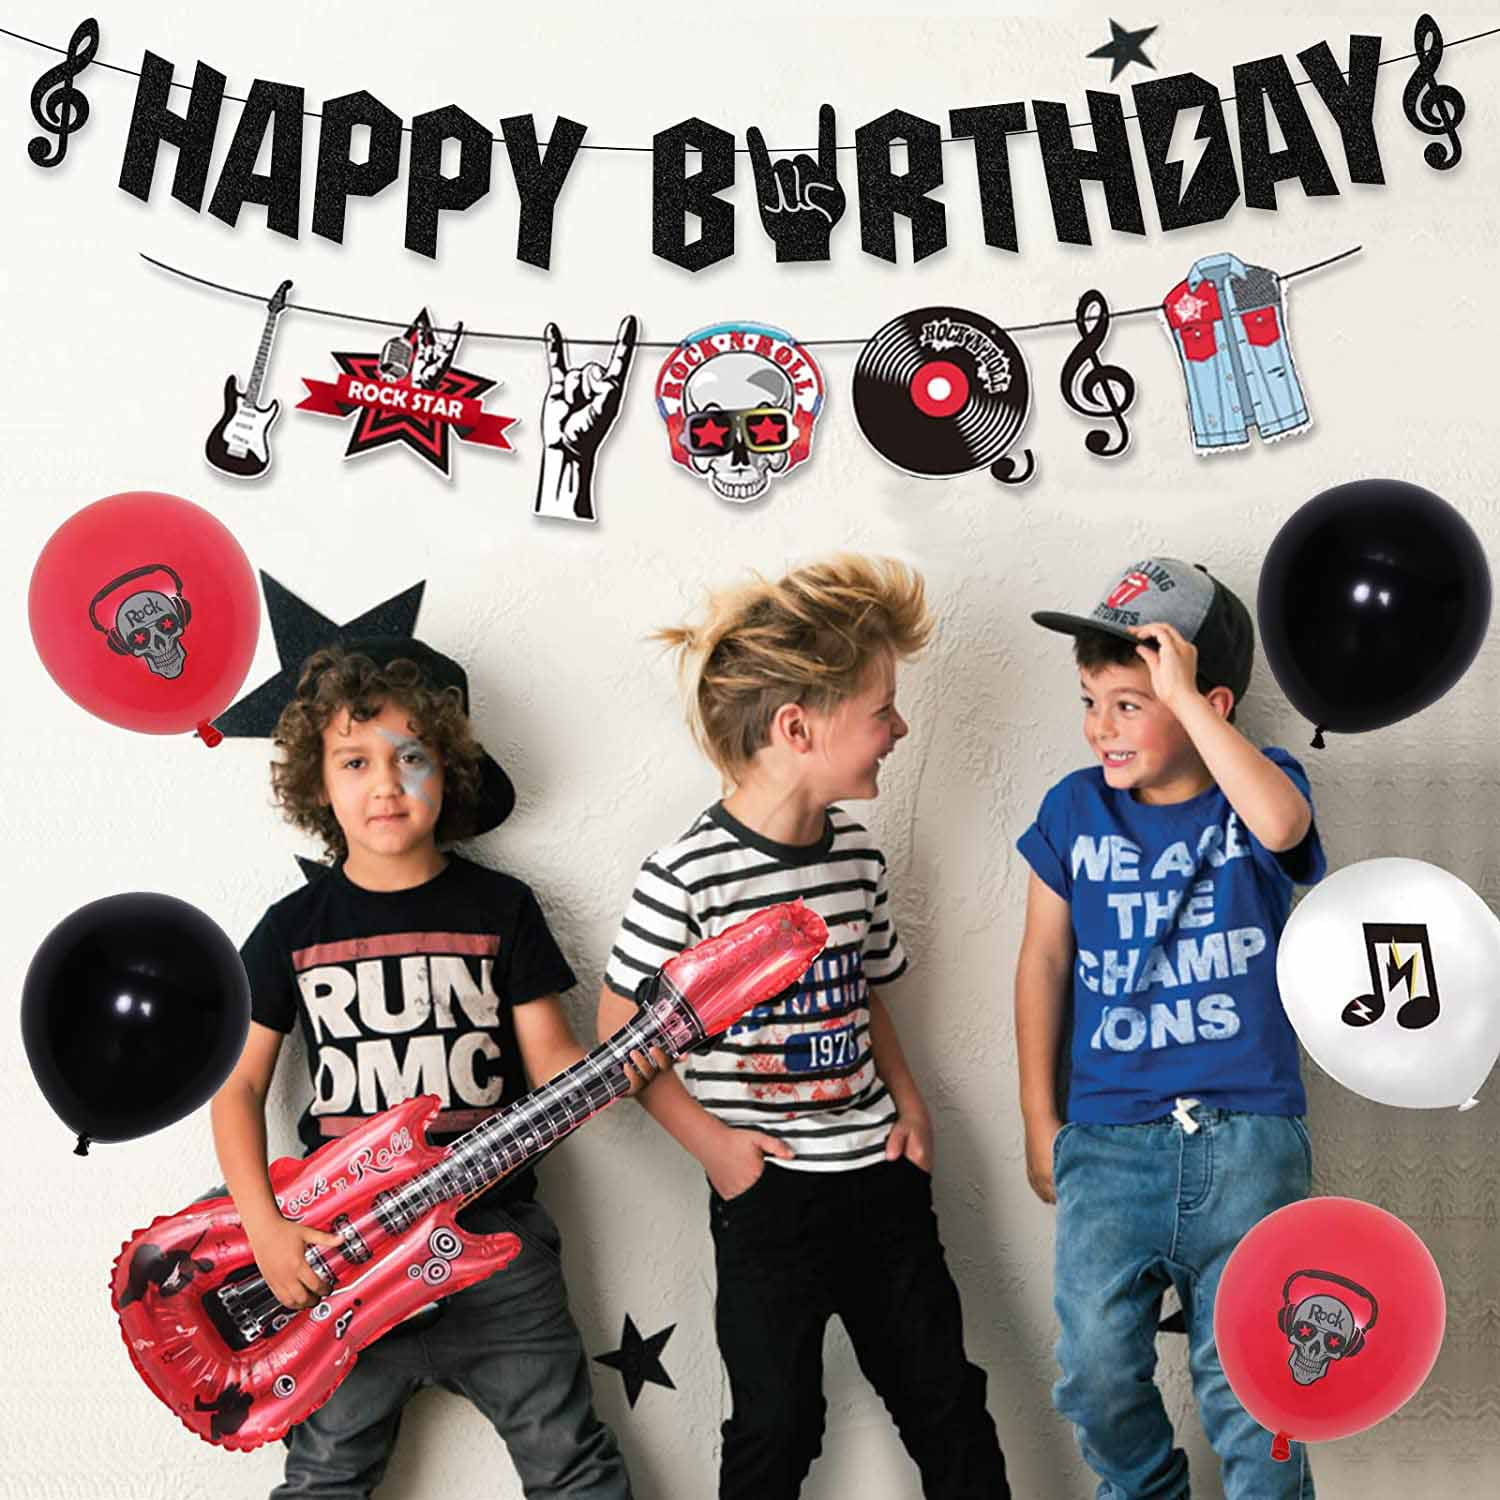 Crenics Rock and Roll Birthday Party Decorations, Creative Large Happy  Birthday Banner Backdrop for Born to Rock Star Music Theme Birthday Party